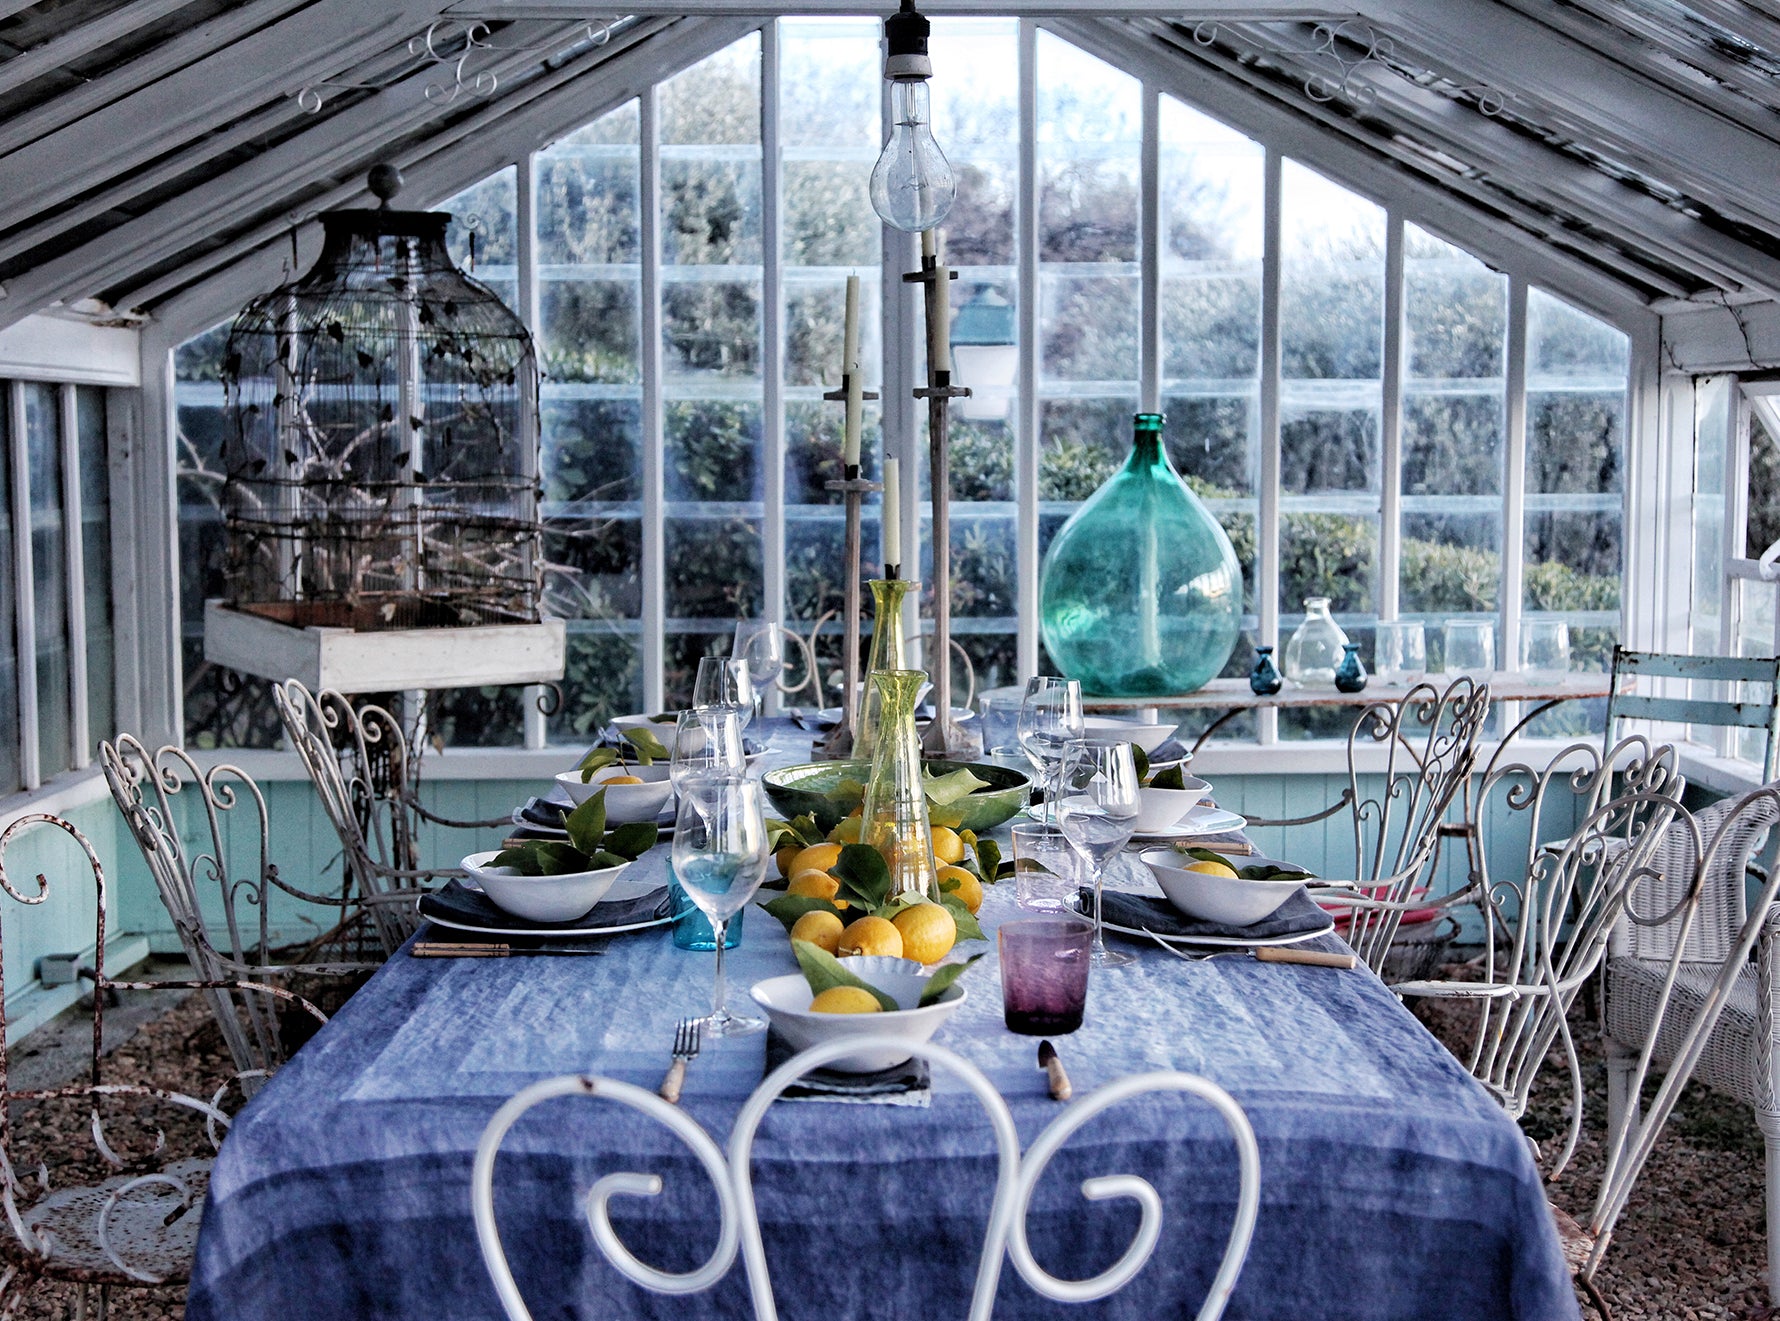 Shades Of Blue Striped Linen Tablecloth